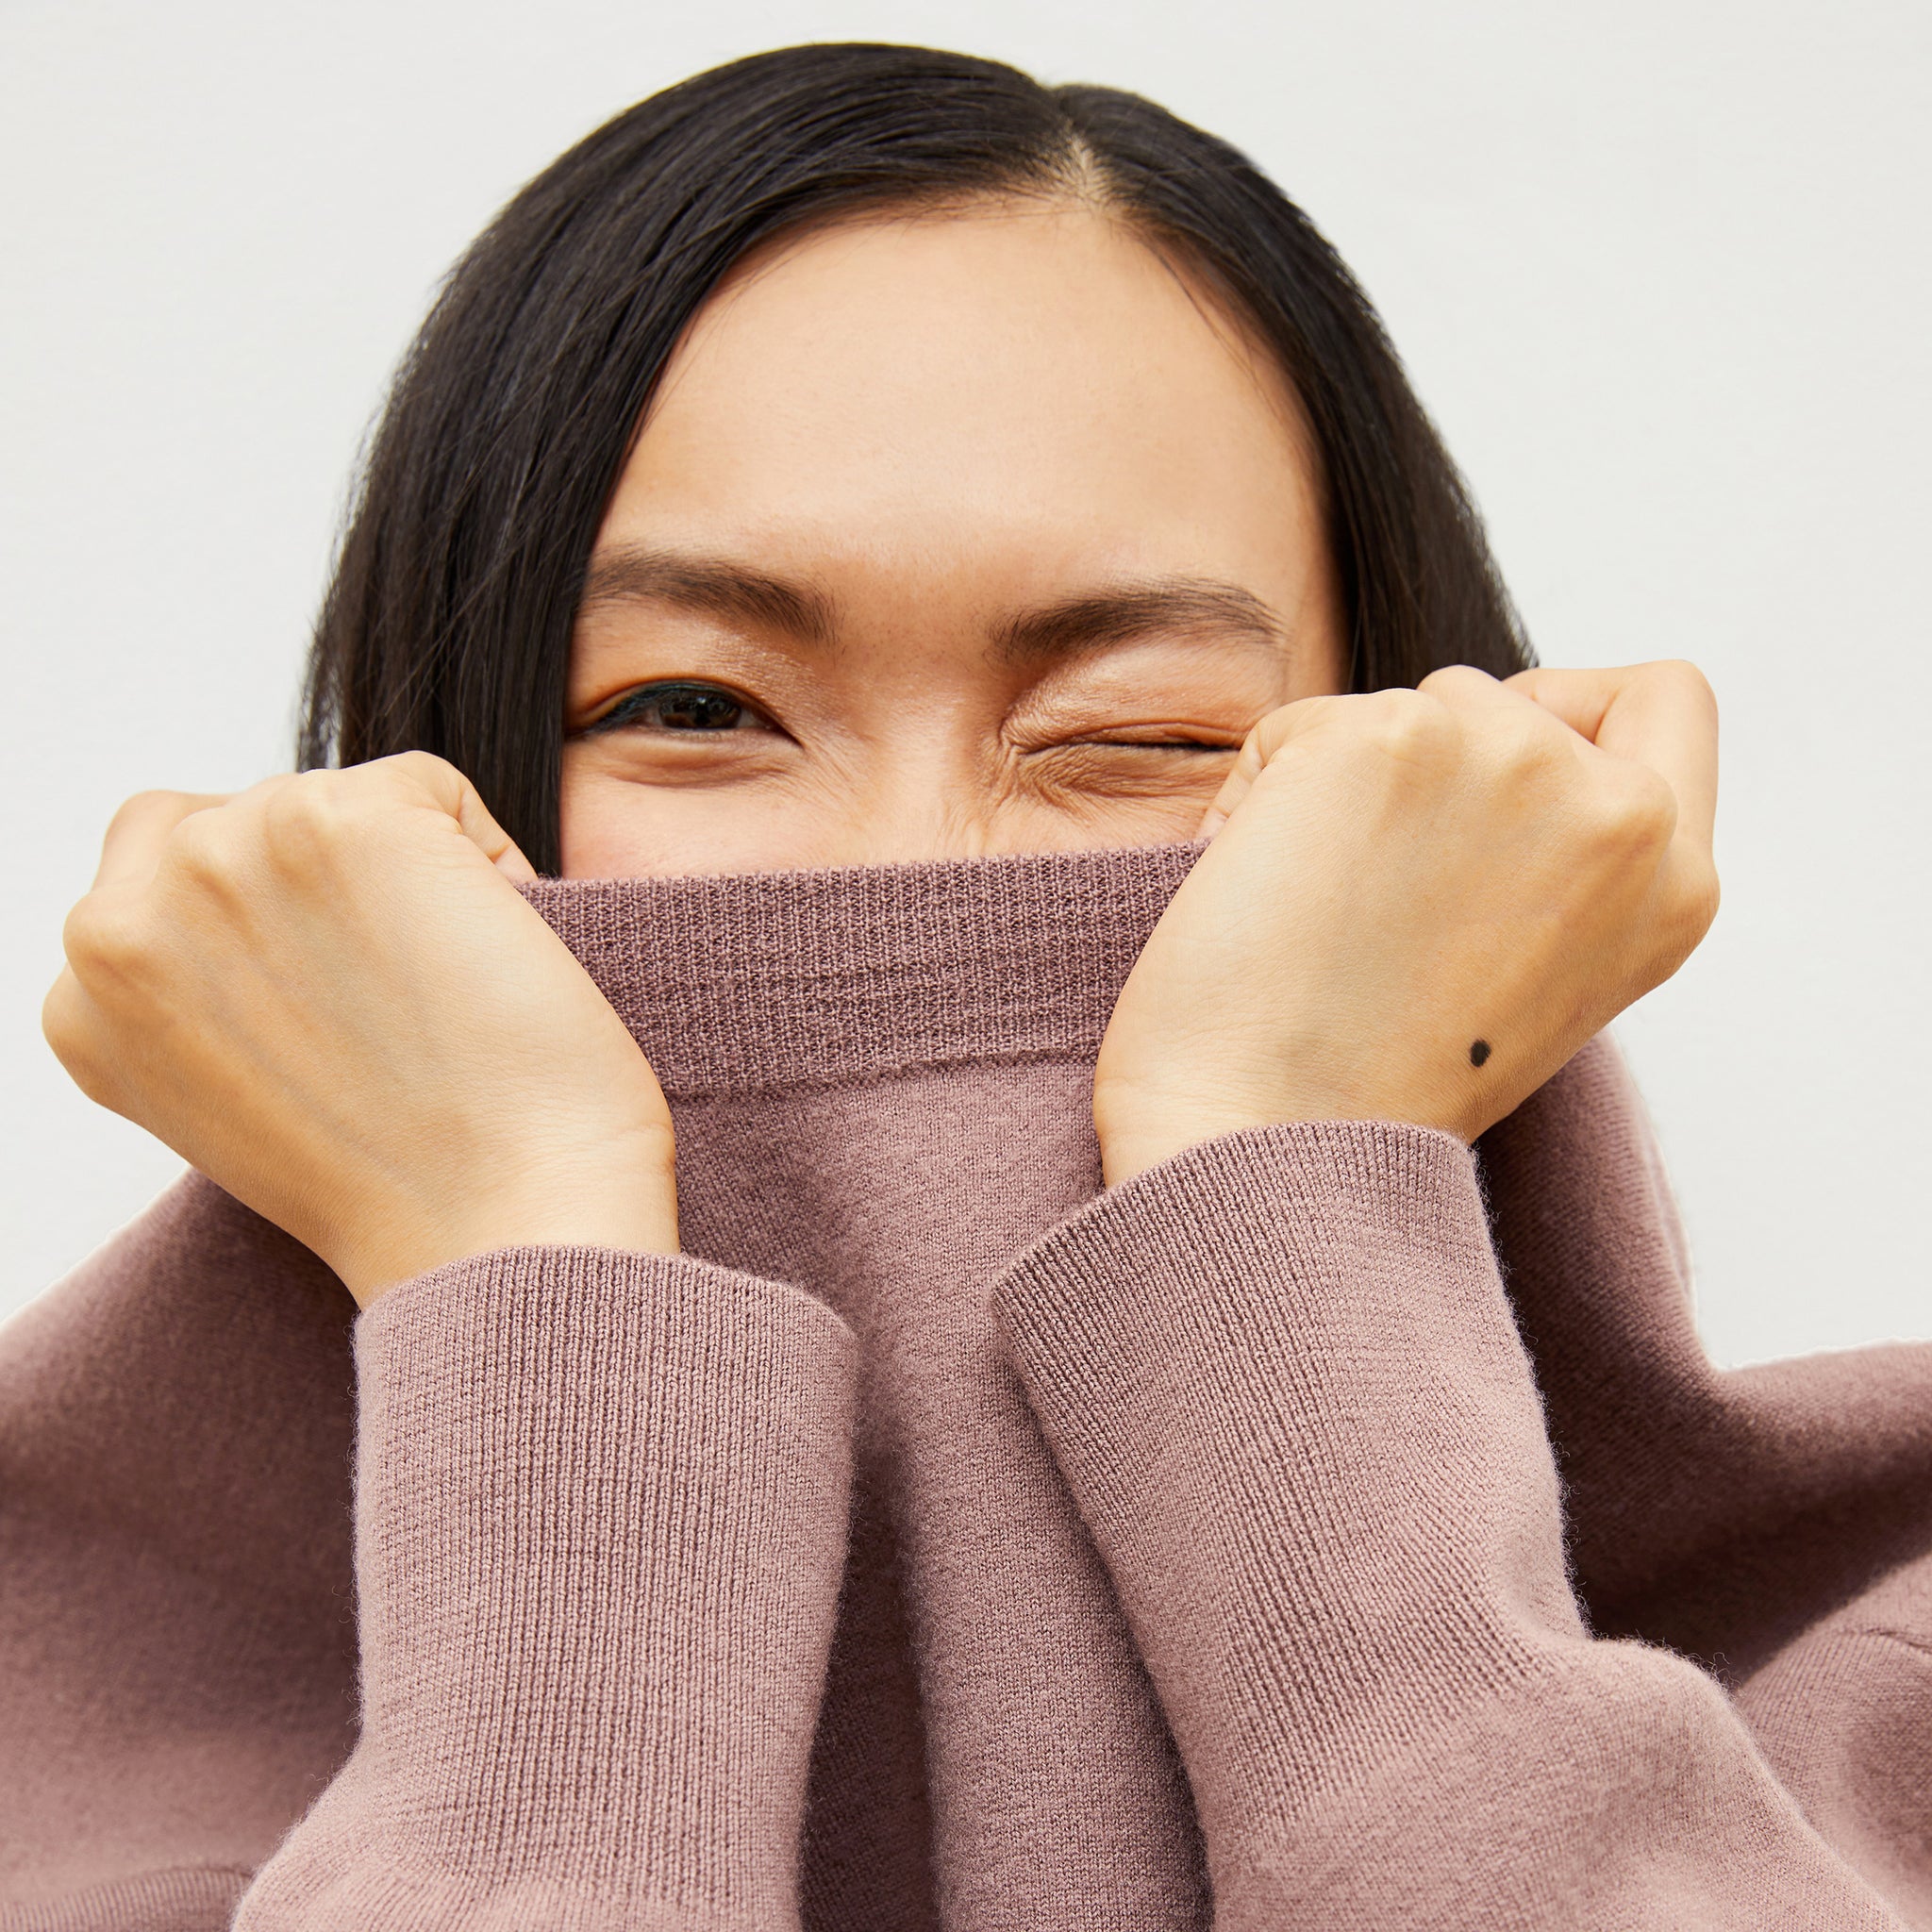 Front image of a woman wearing the quincy sweater in rose taupe 